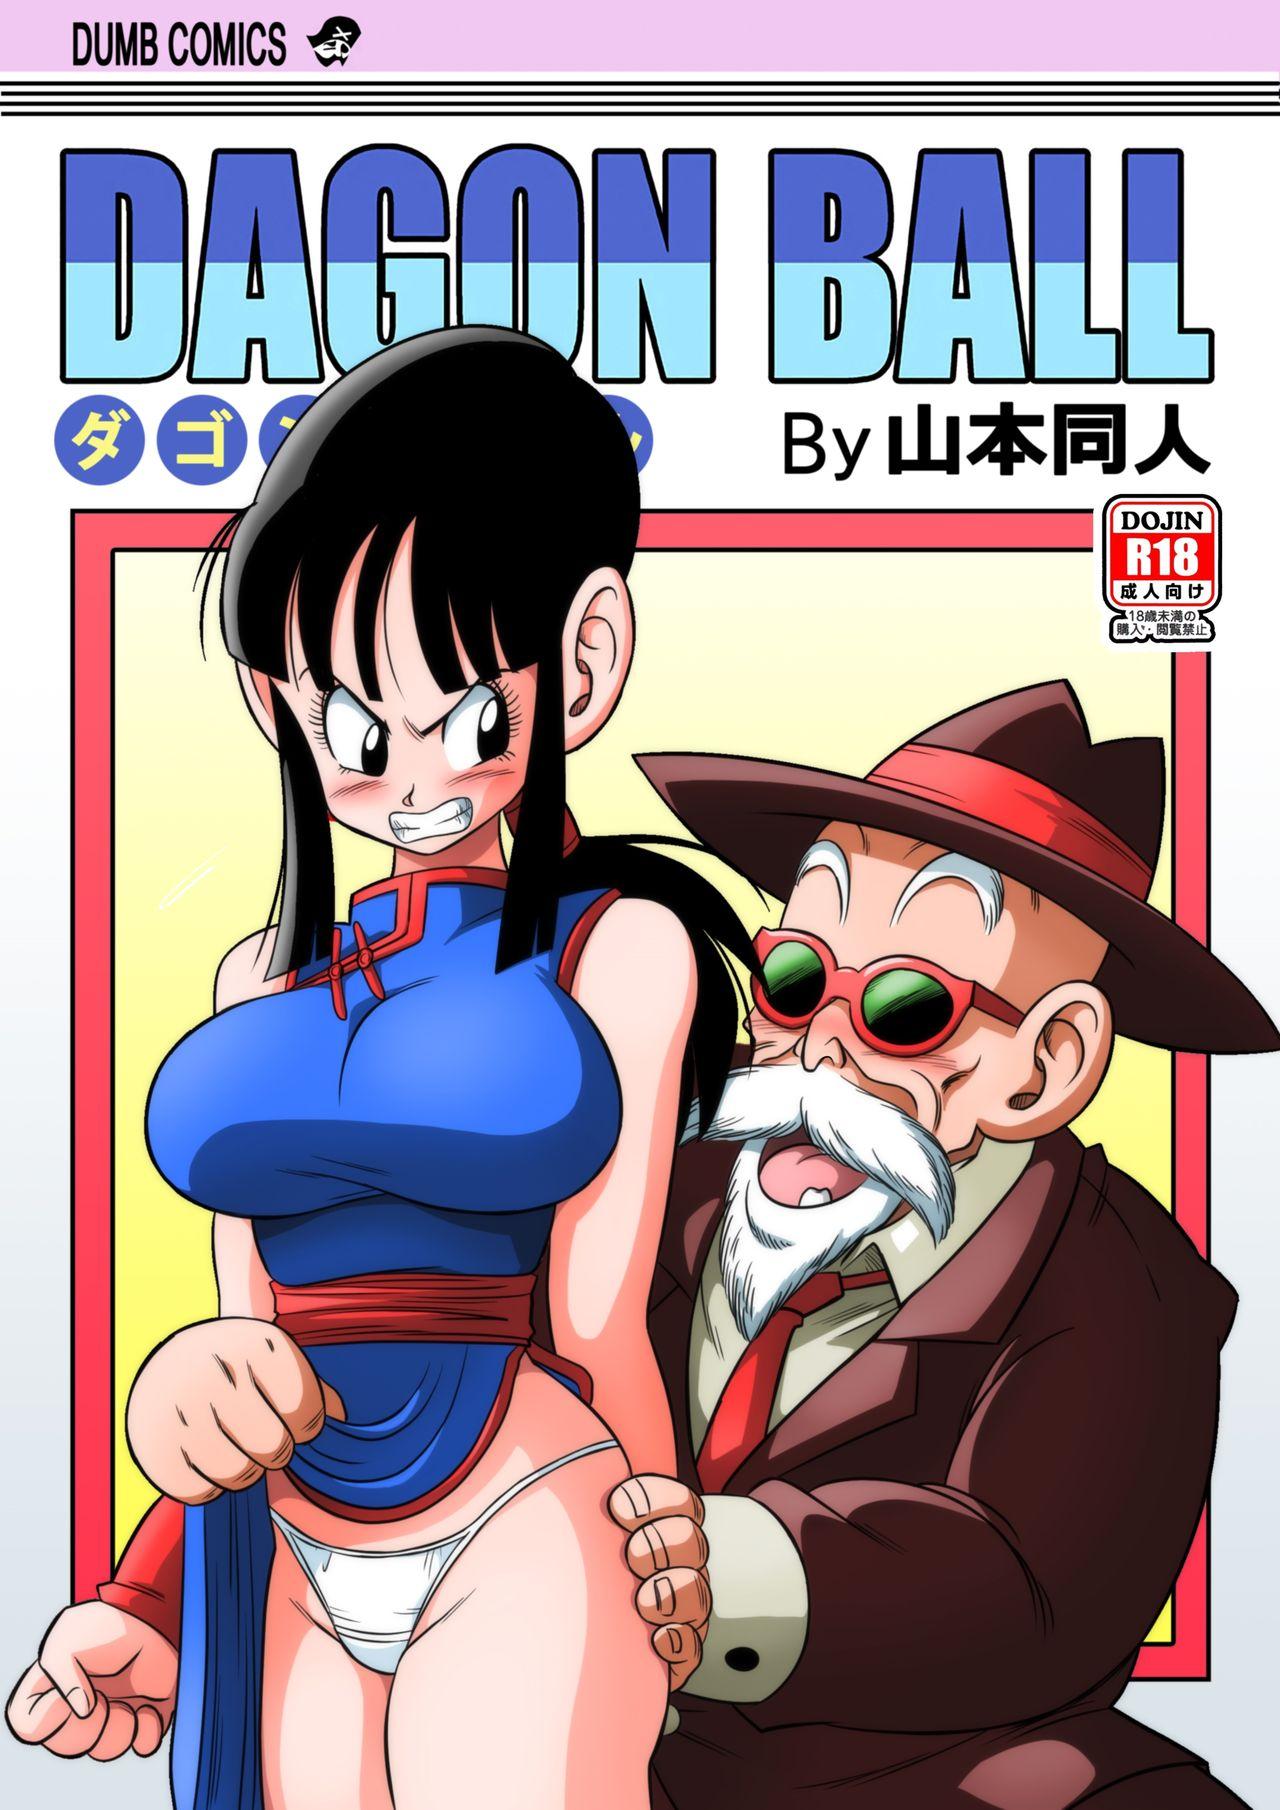 Dicks "An Ancient Tradition" - Young Wife is Harassed! - Dragon ball z Foot Fetish - Picture 1